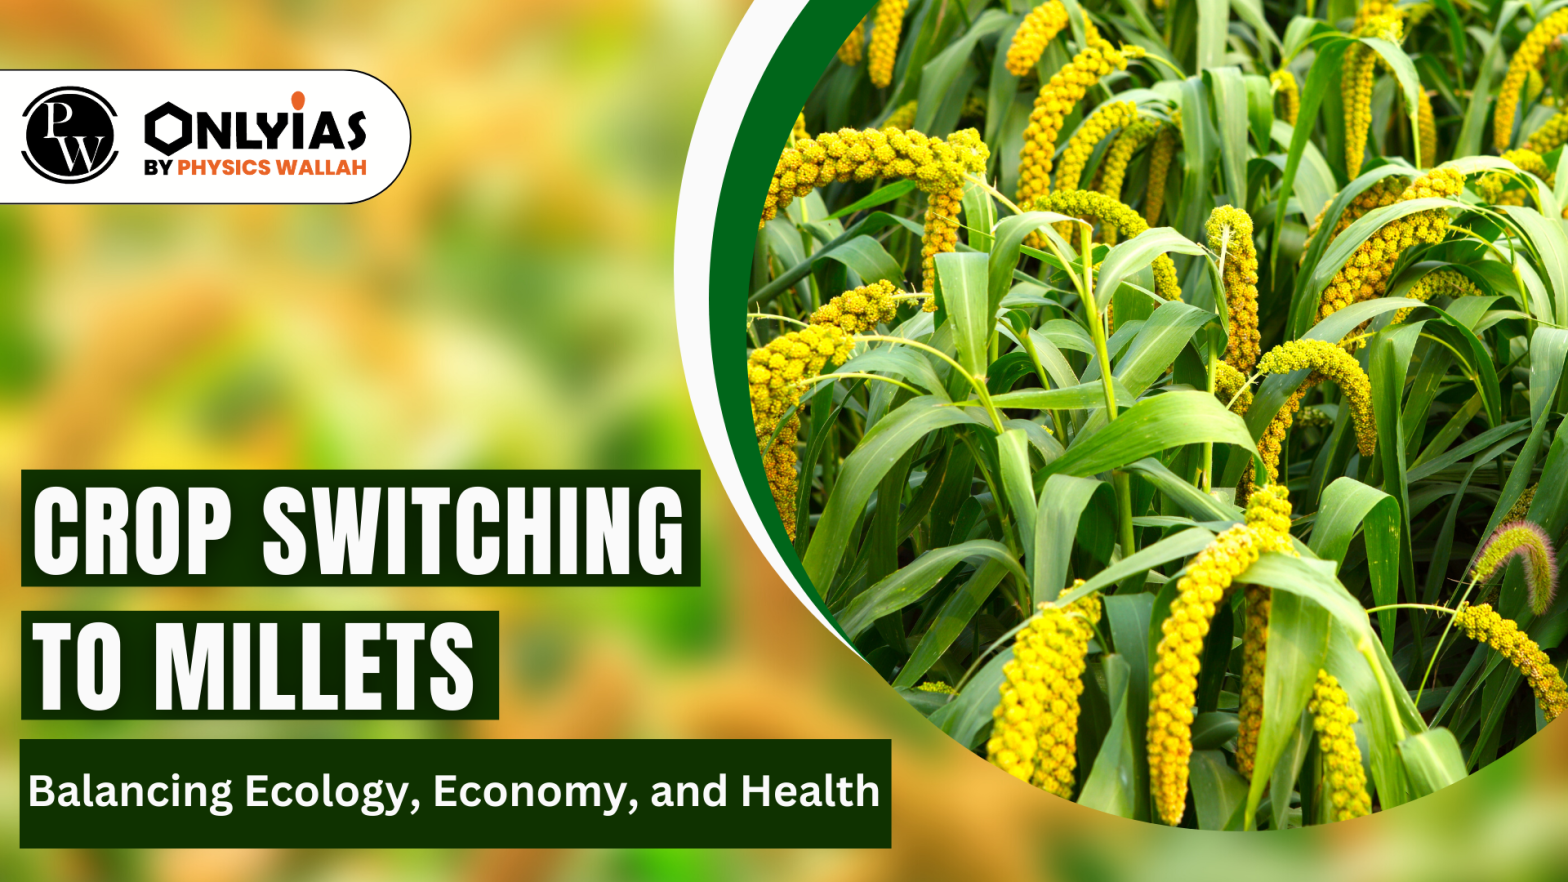 Crop Switching to Millets: Balancing Ecology, Economy, and Health